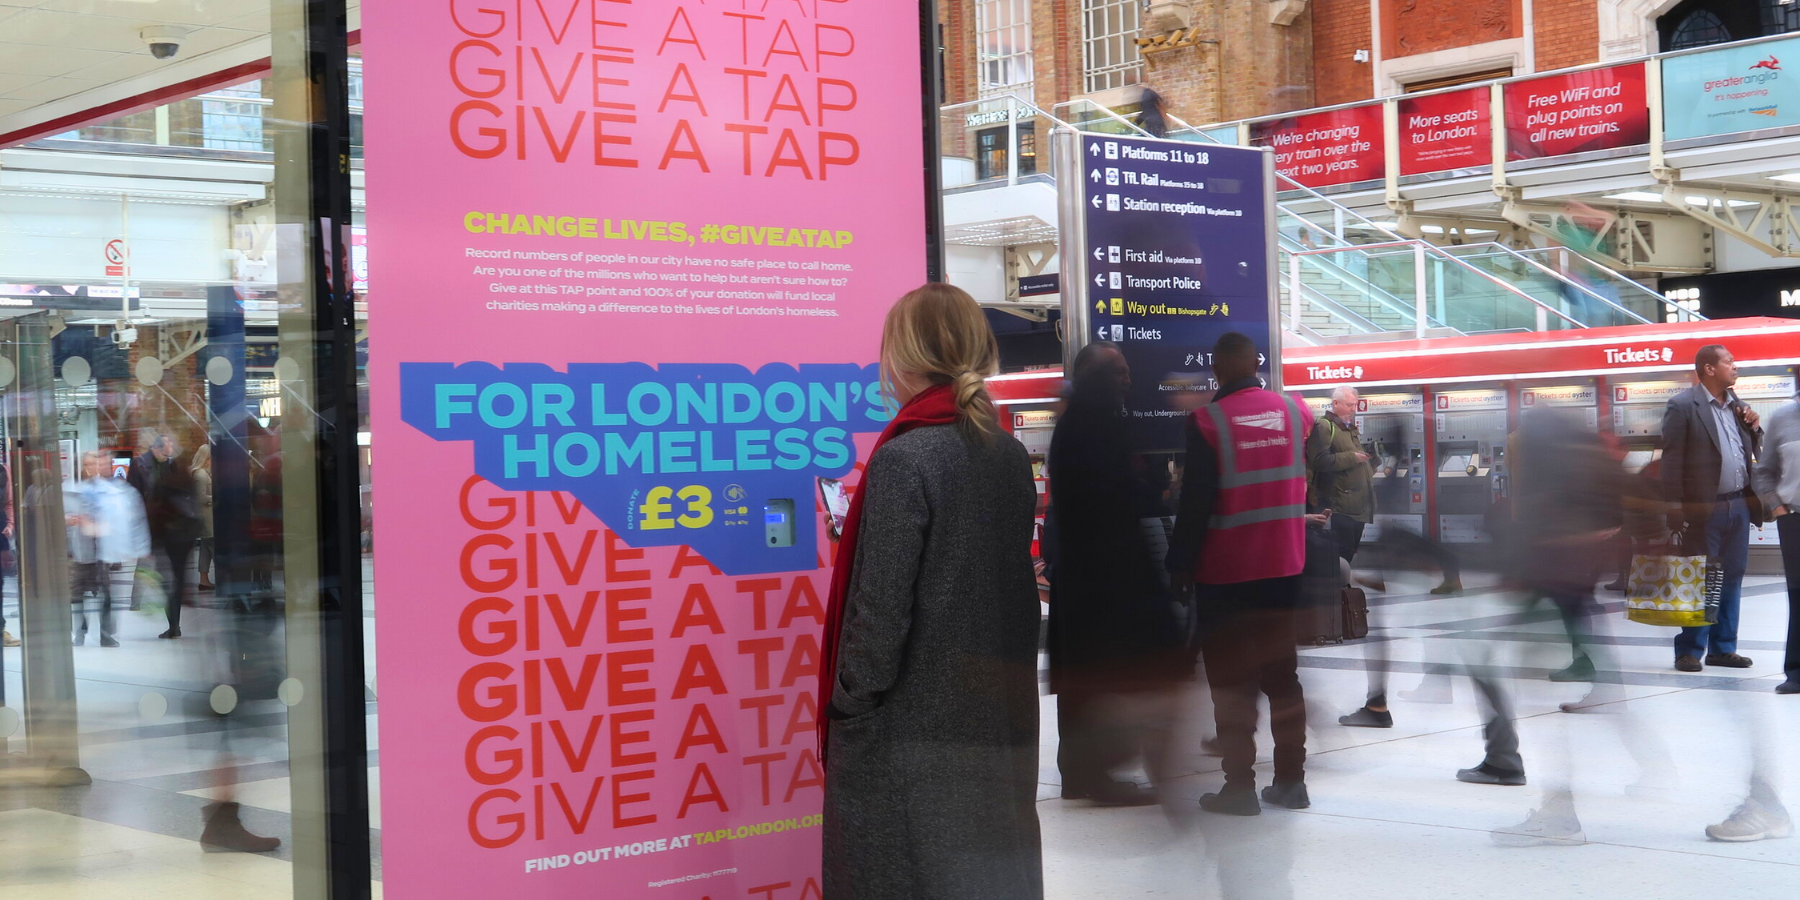 TAP point in London to donate to the London homeless charities Group